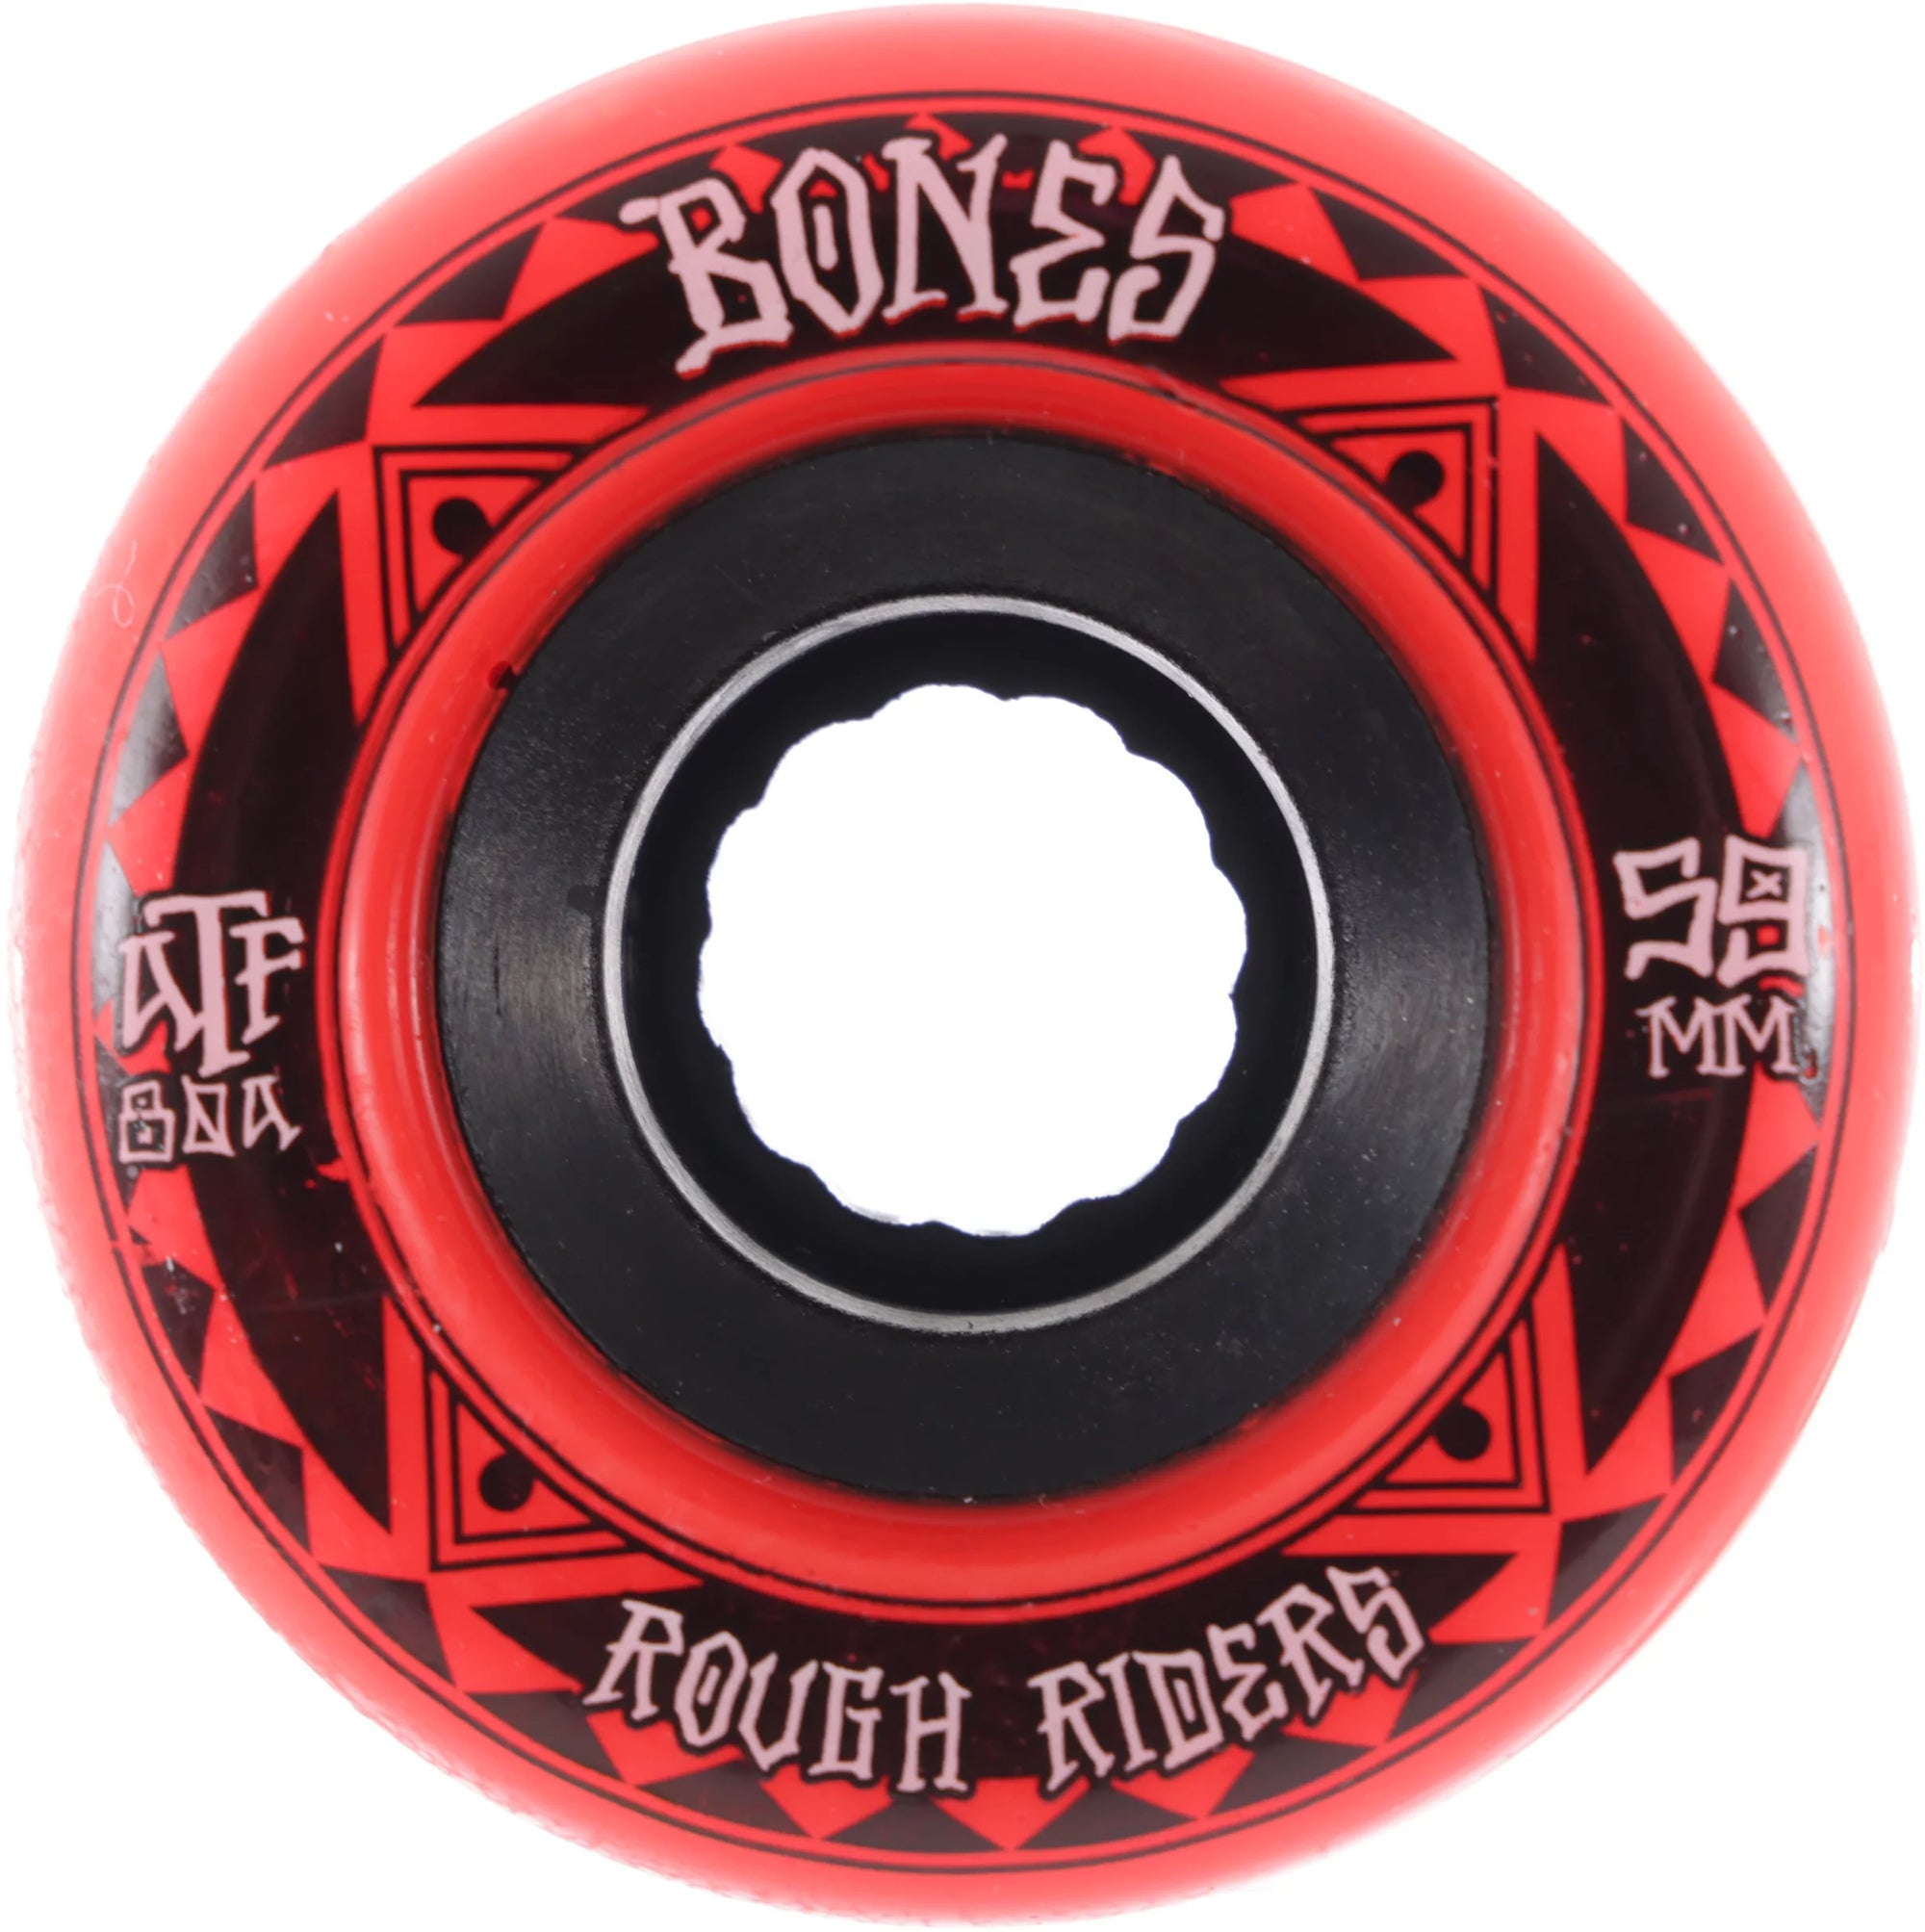 Bones Wheels - ATF Rough Riders - Red - 85A 59mm